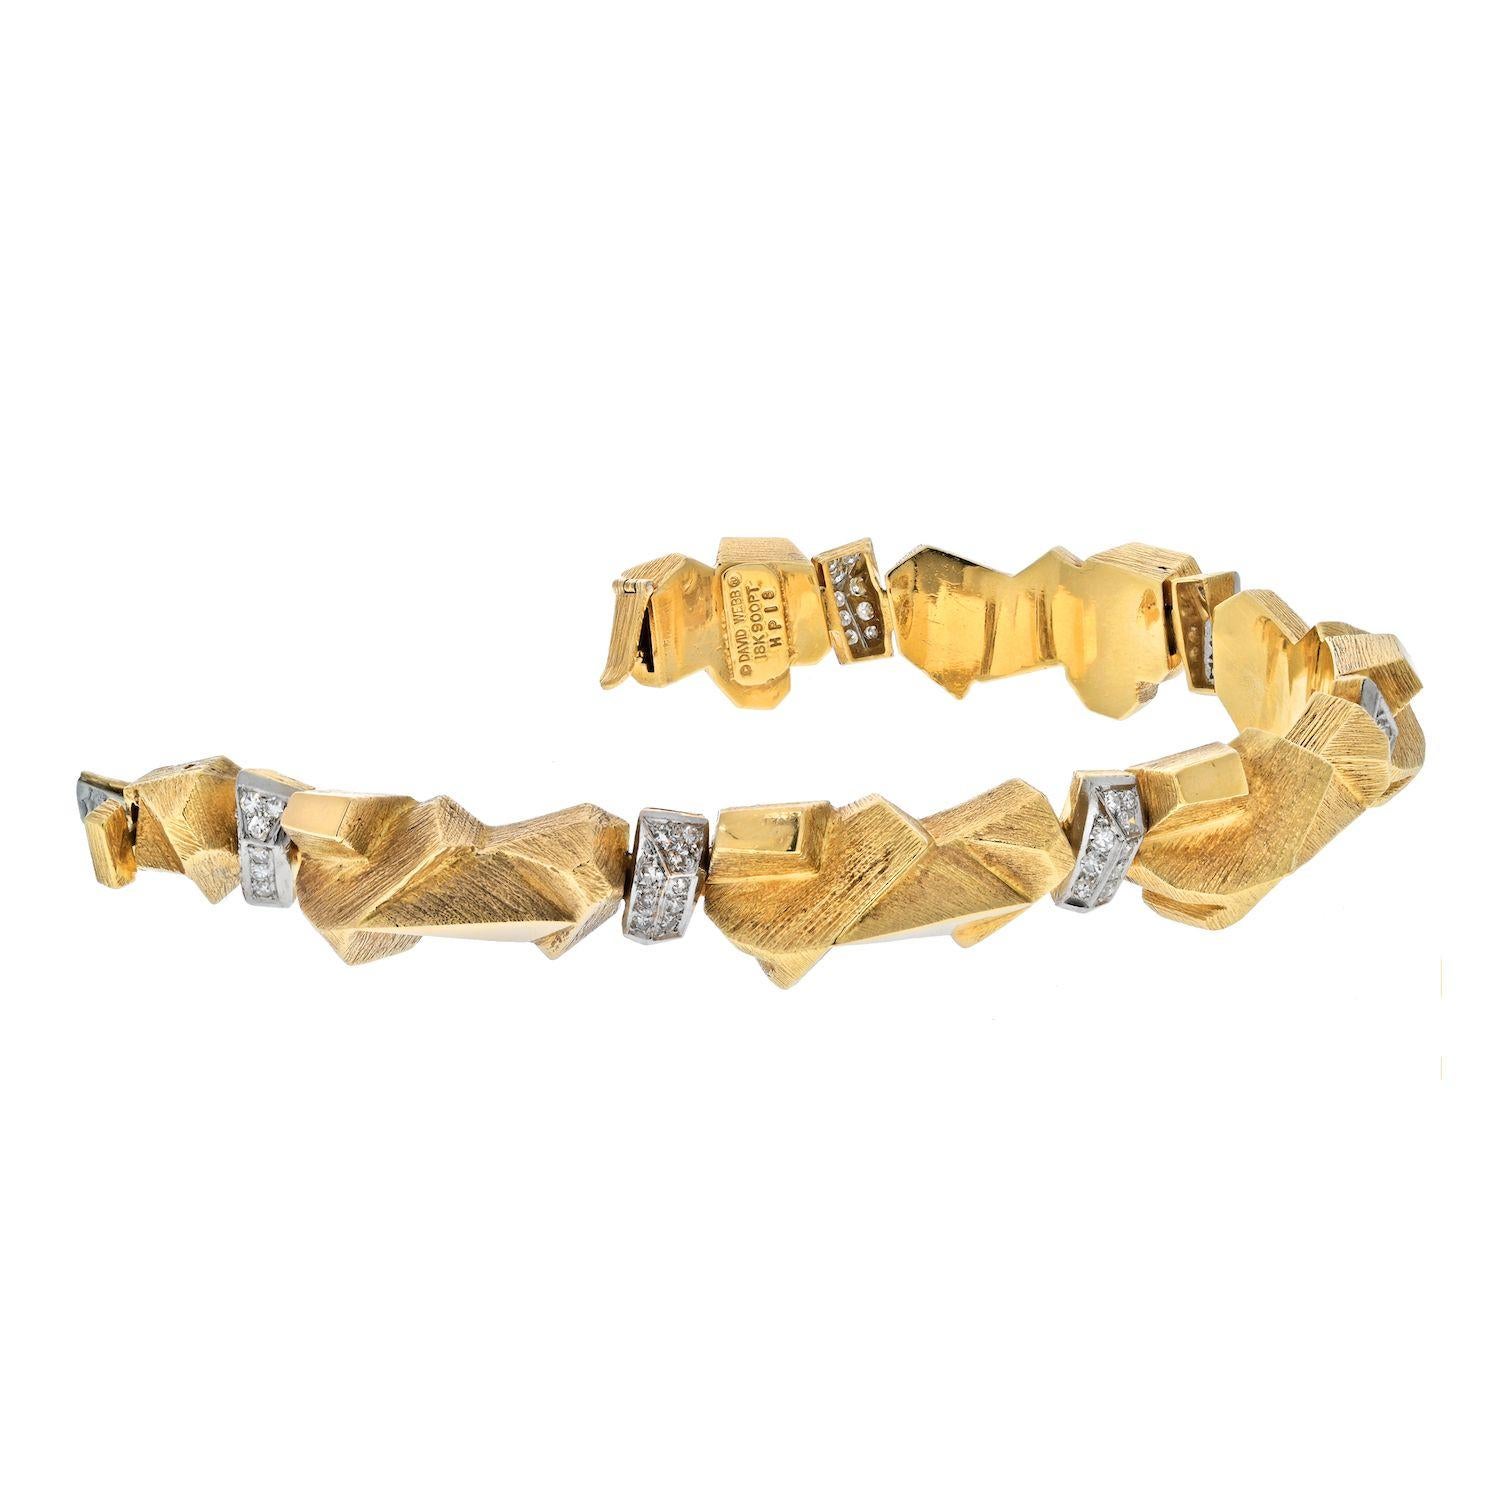 This is an articulated yellow gold ski slope nugget bracelet by David Webb. It is made in a form of a gold slope nugget with diamond accents throughout. Comes with the certificate from David Webb.
Wrist size circumference: 8 inches.
Approximately